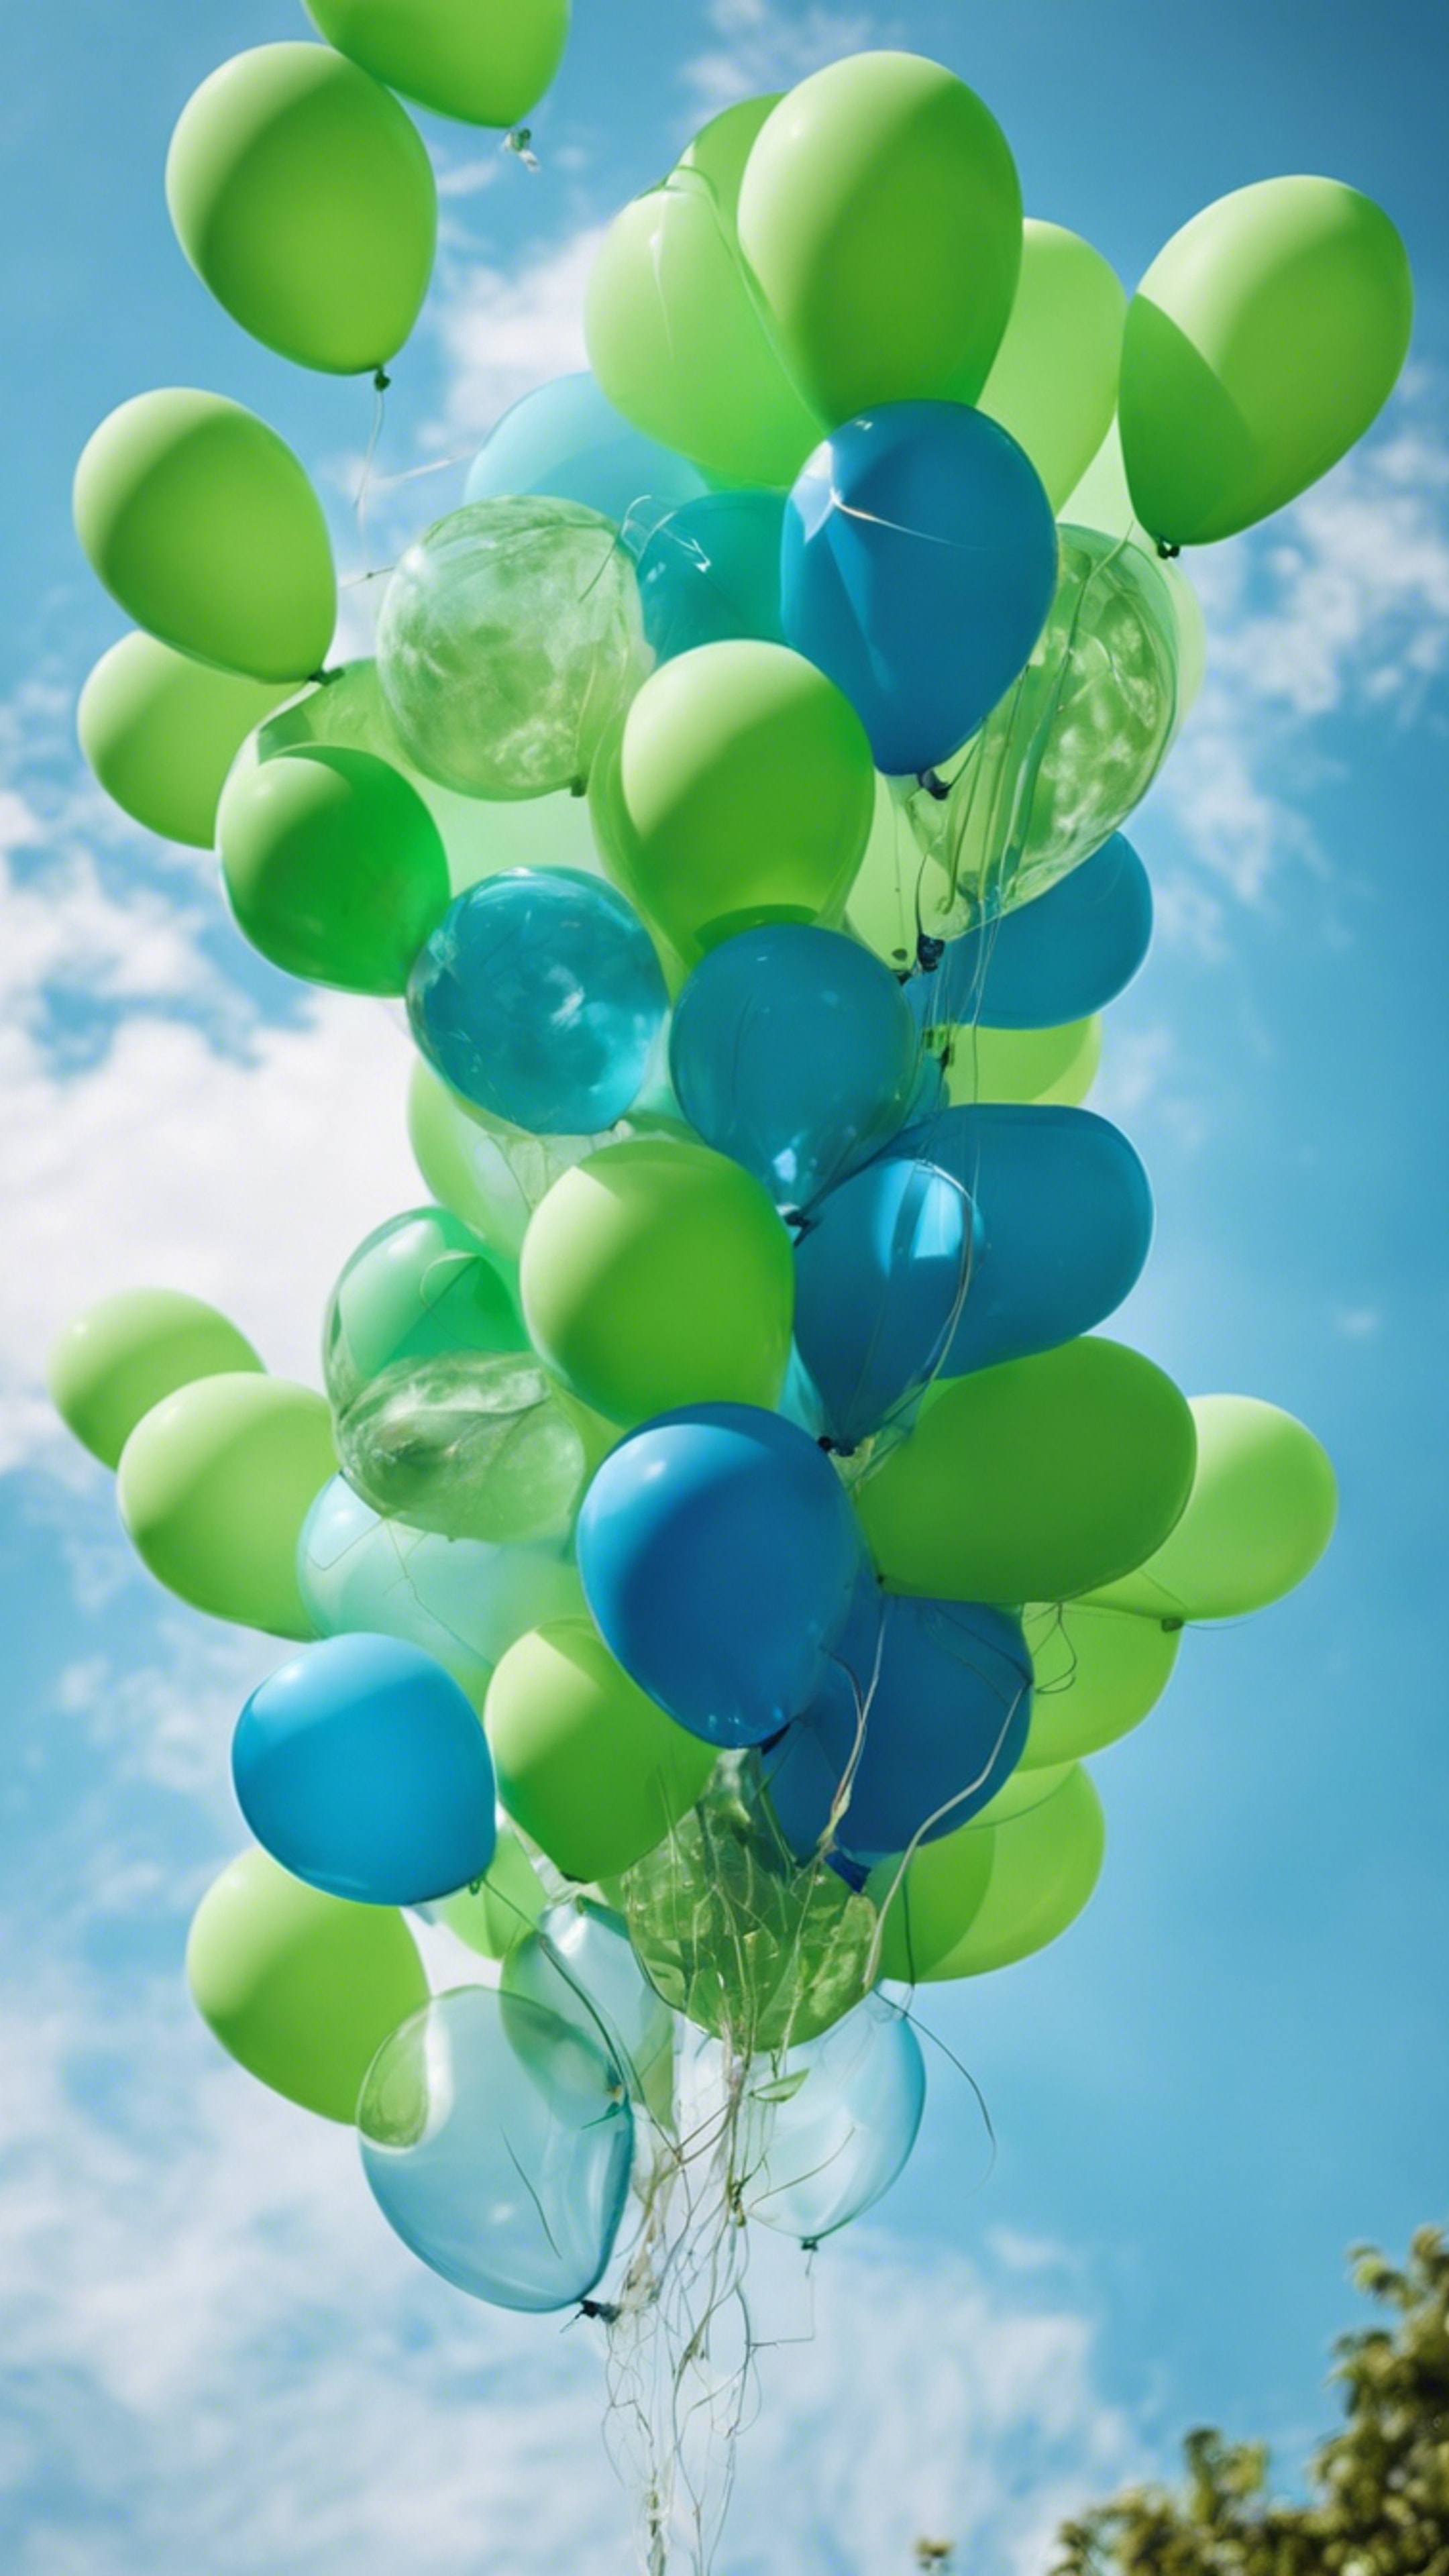 An array of blue and green balloons floating in a clear sky during the day. Тапет[0f6c85f120014fa1a128]